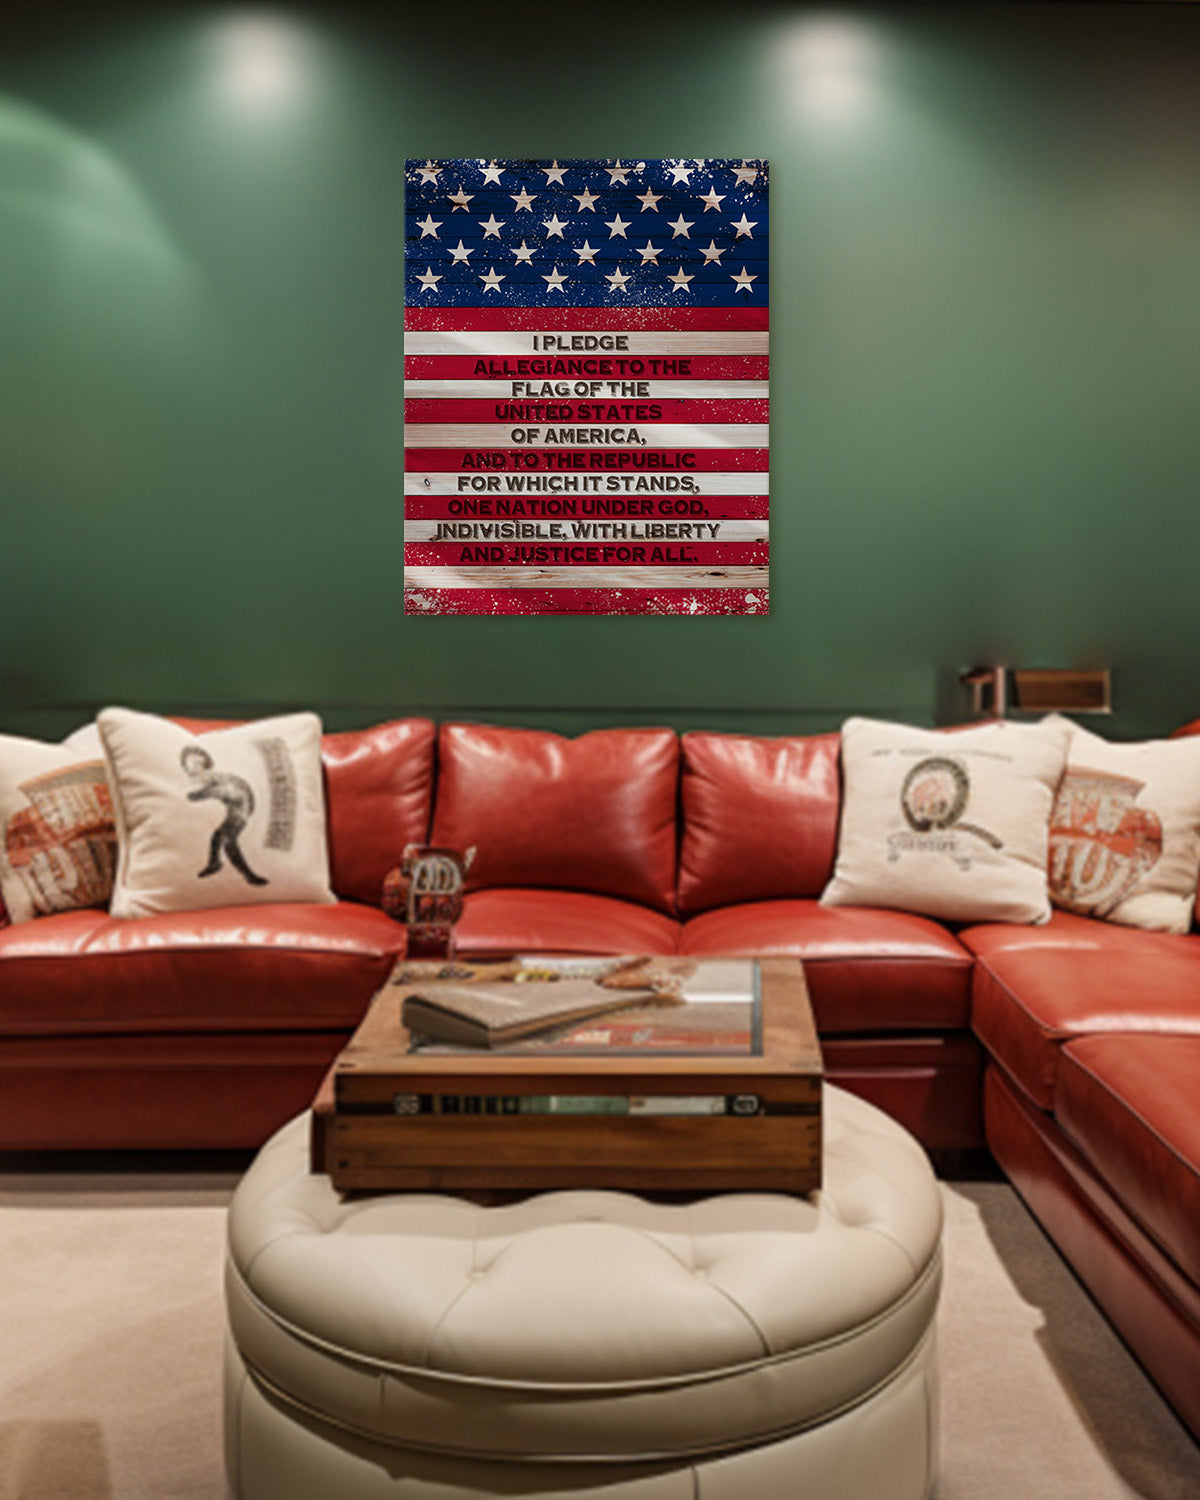 Pledge of Allegiance American Flag Wall Art - Patriotic Wall Decor - Memorial Day, 4th of July Canvas - Gift for Americana, US History Buffs, Military Veterans, Patriots